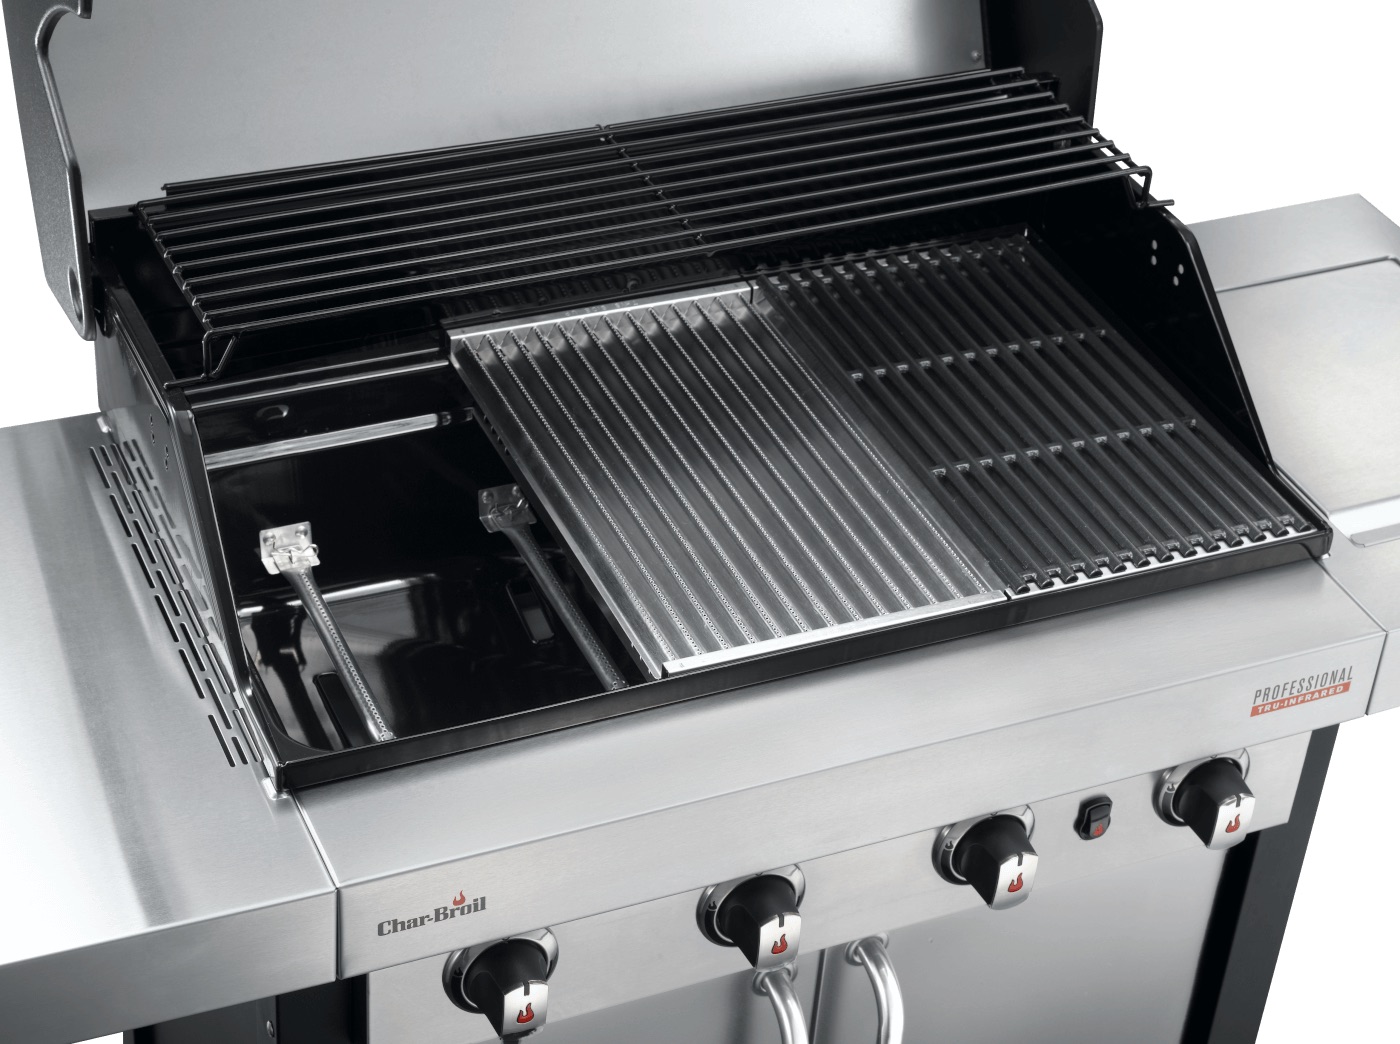 CHAR-BROIL Professional 4400S